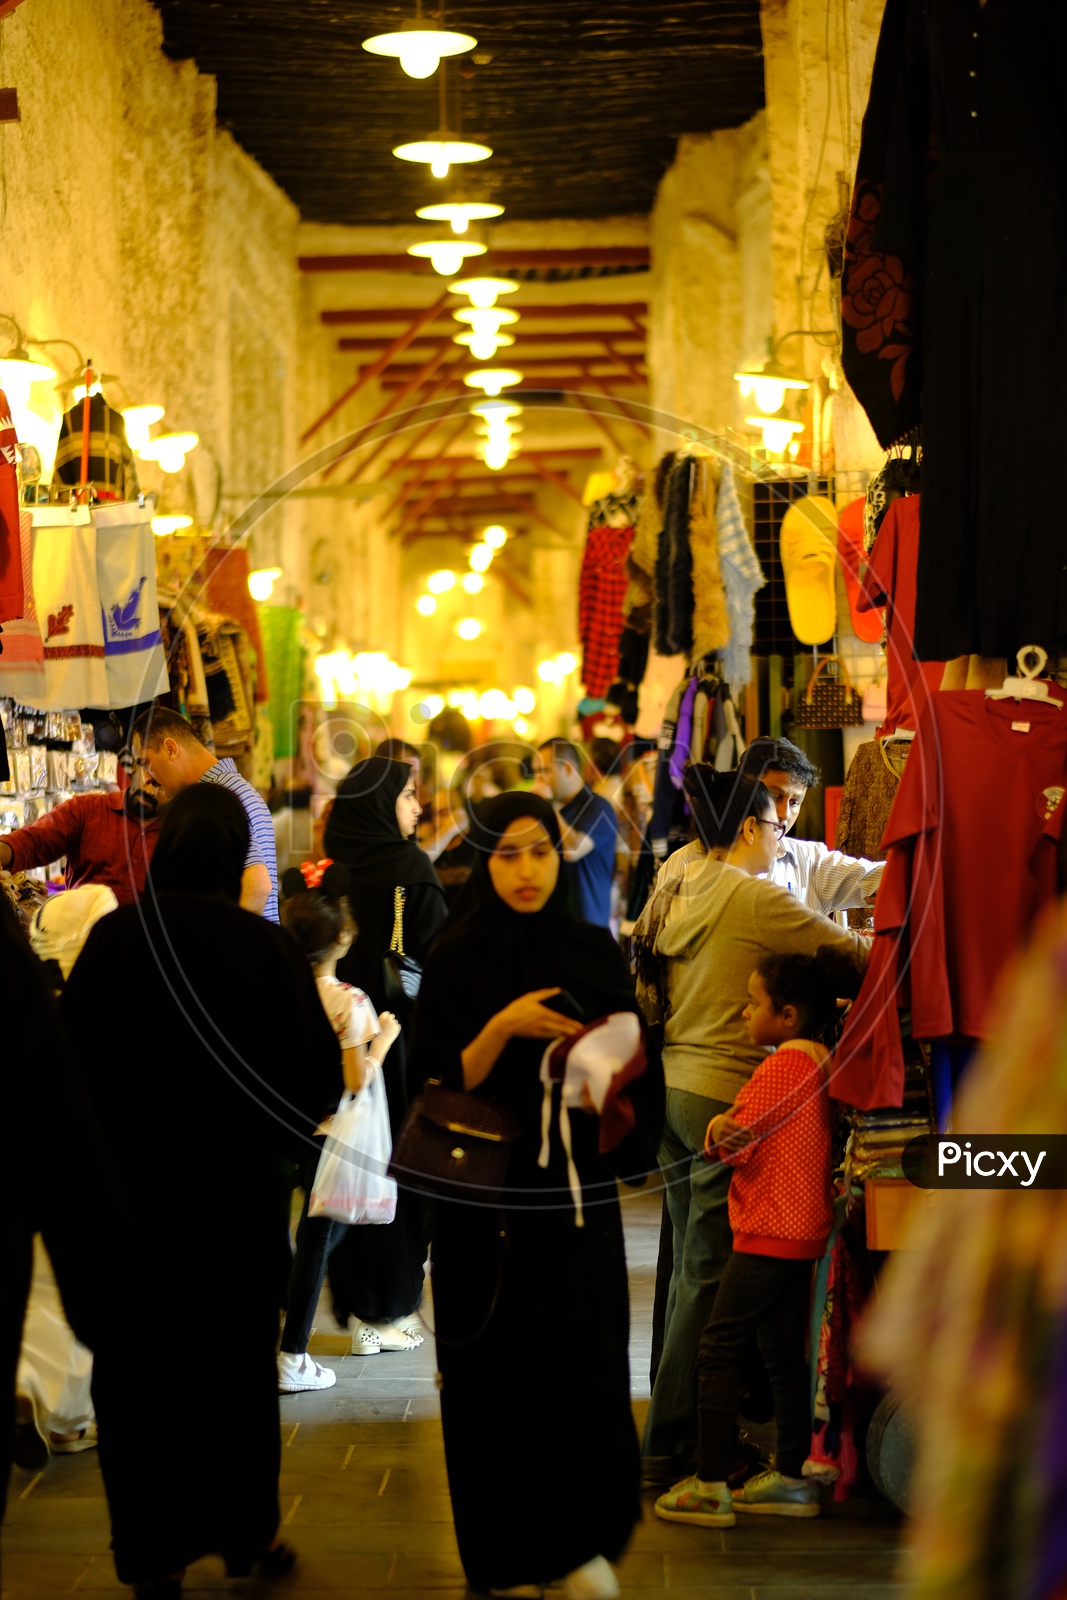 Islamic Women shopping in the streets